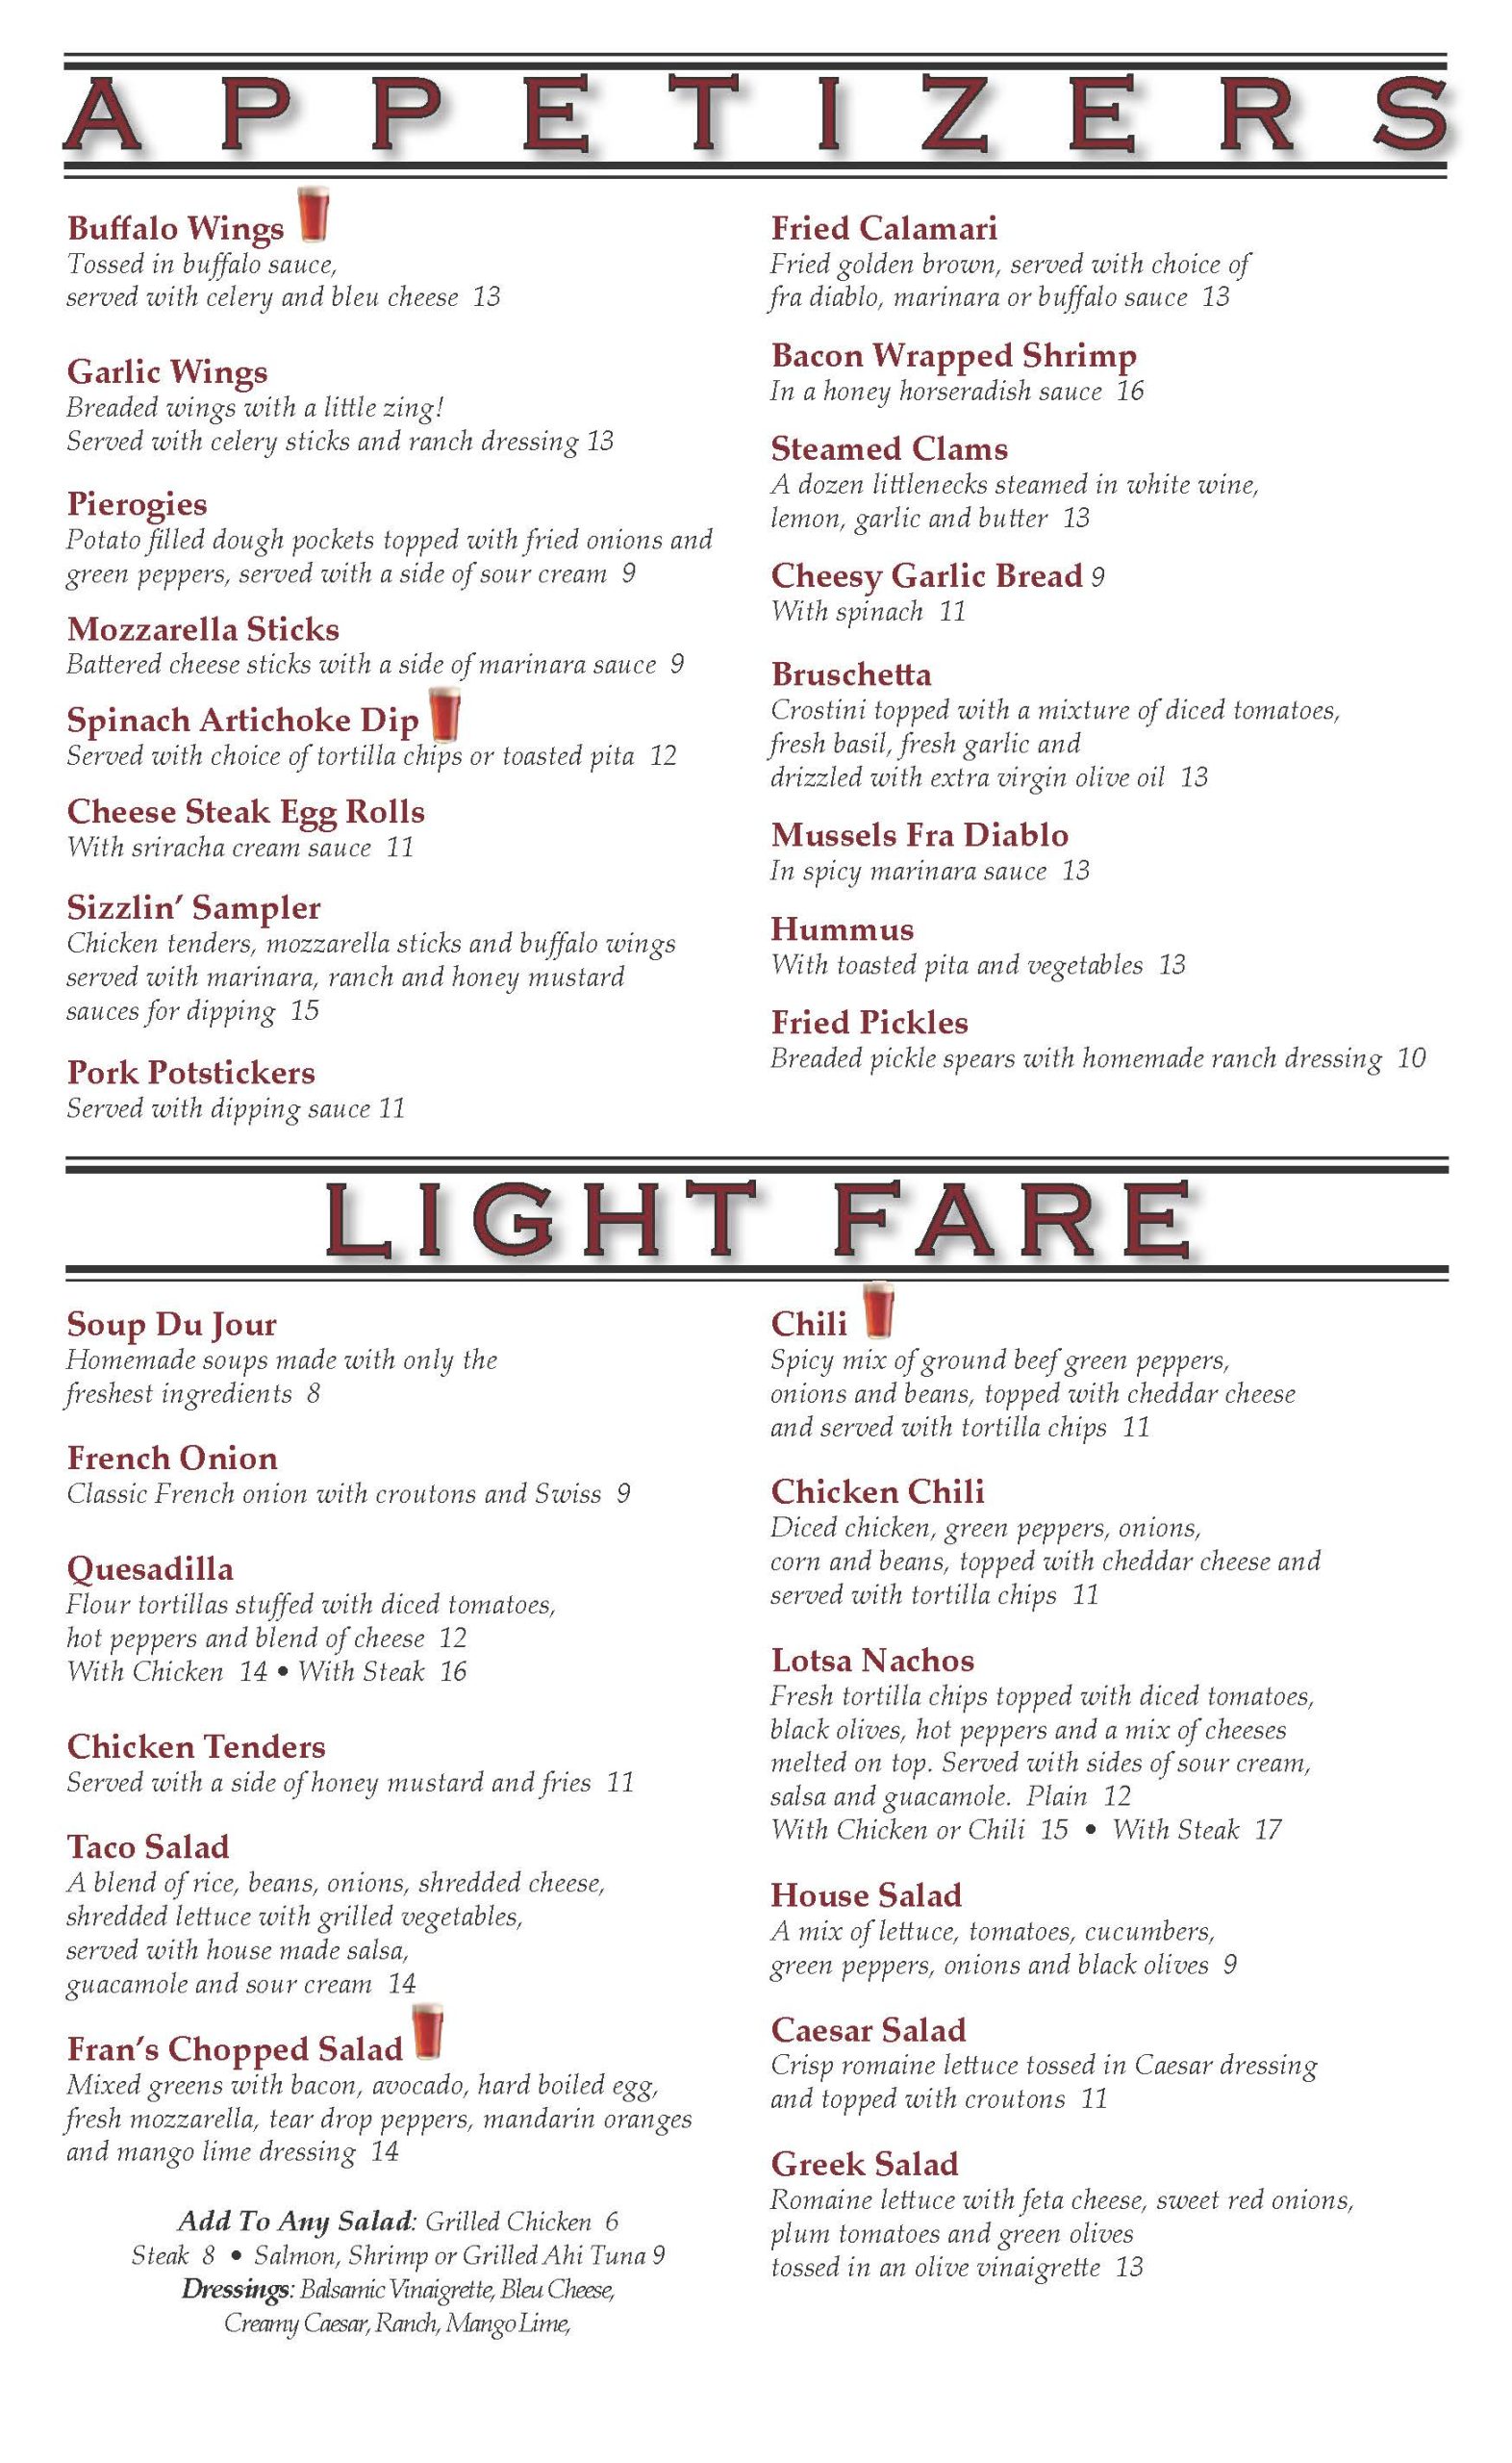 A menu for the eaterizers light fare.